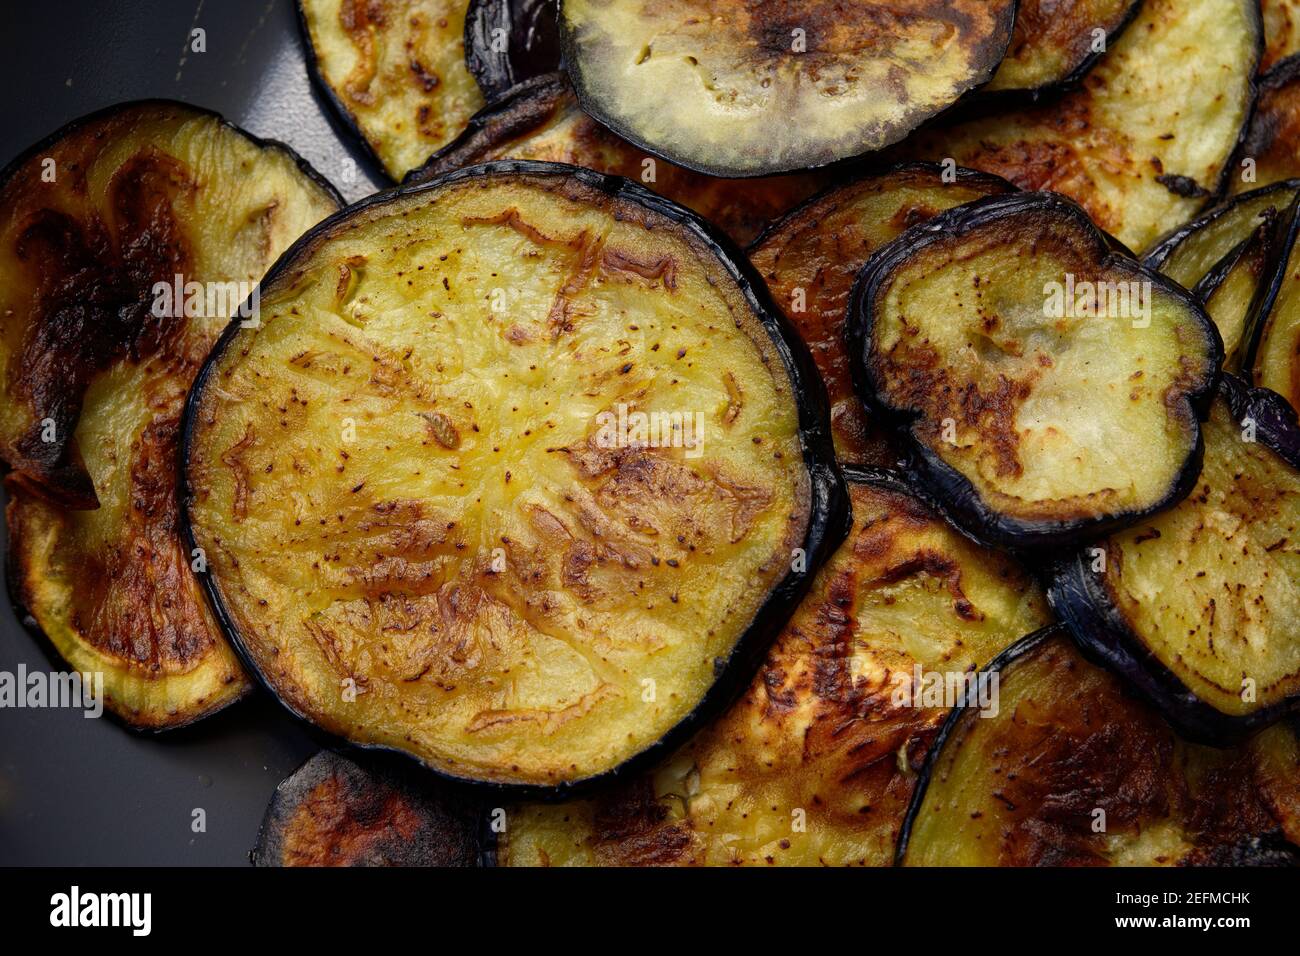 roasted eggplants in a pan Stock Photo